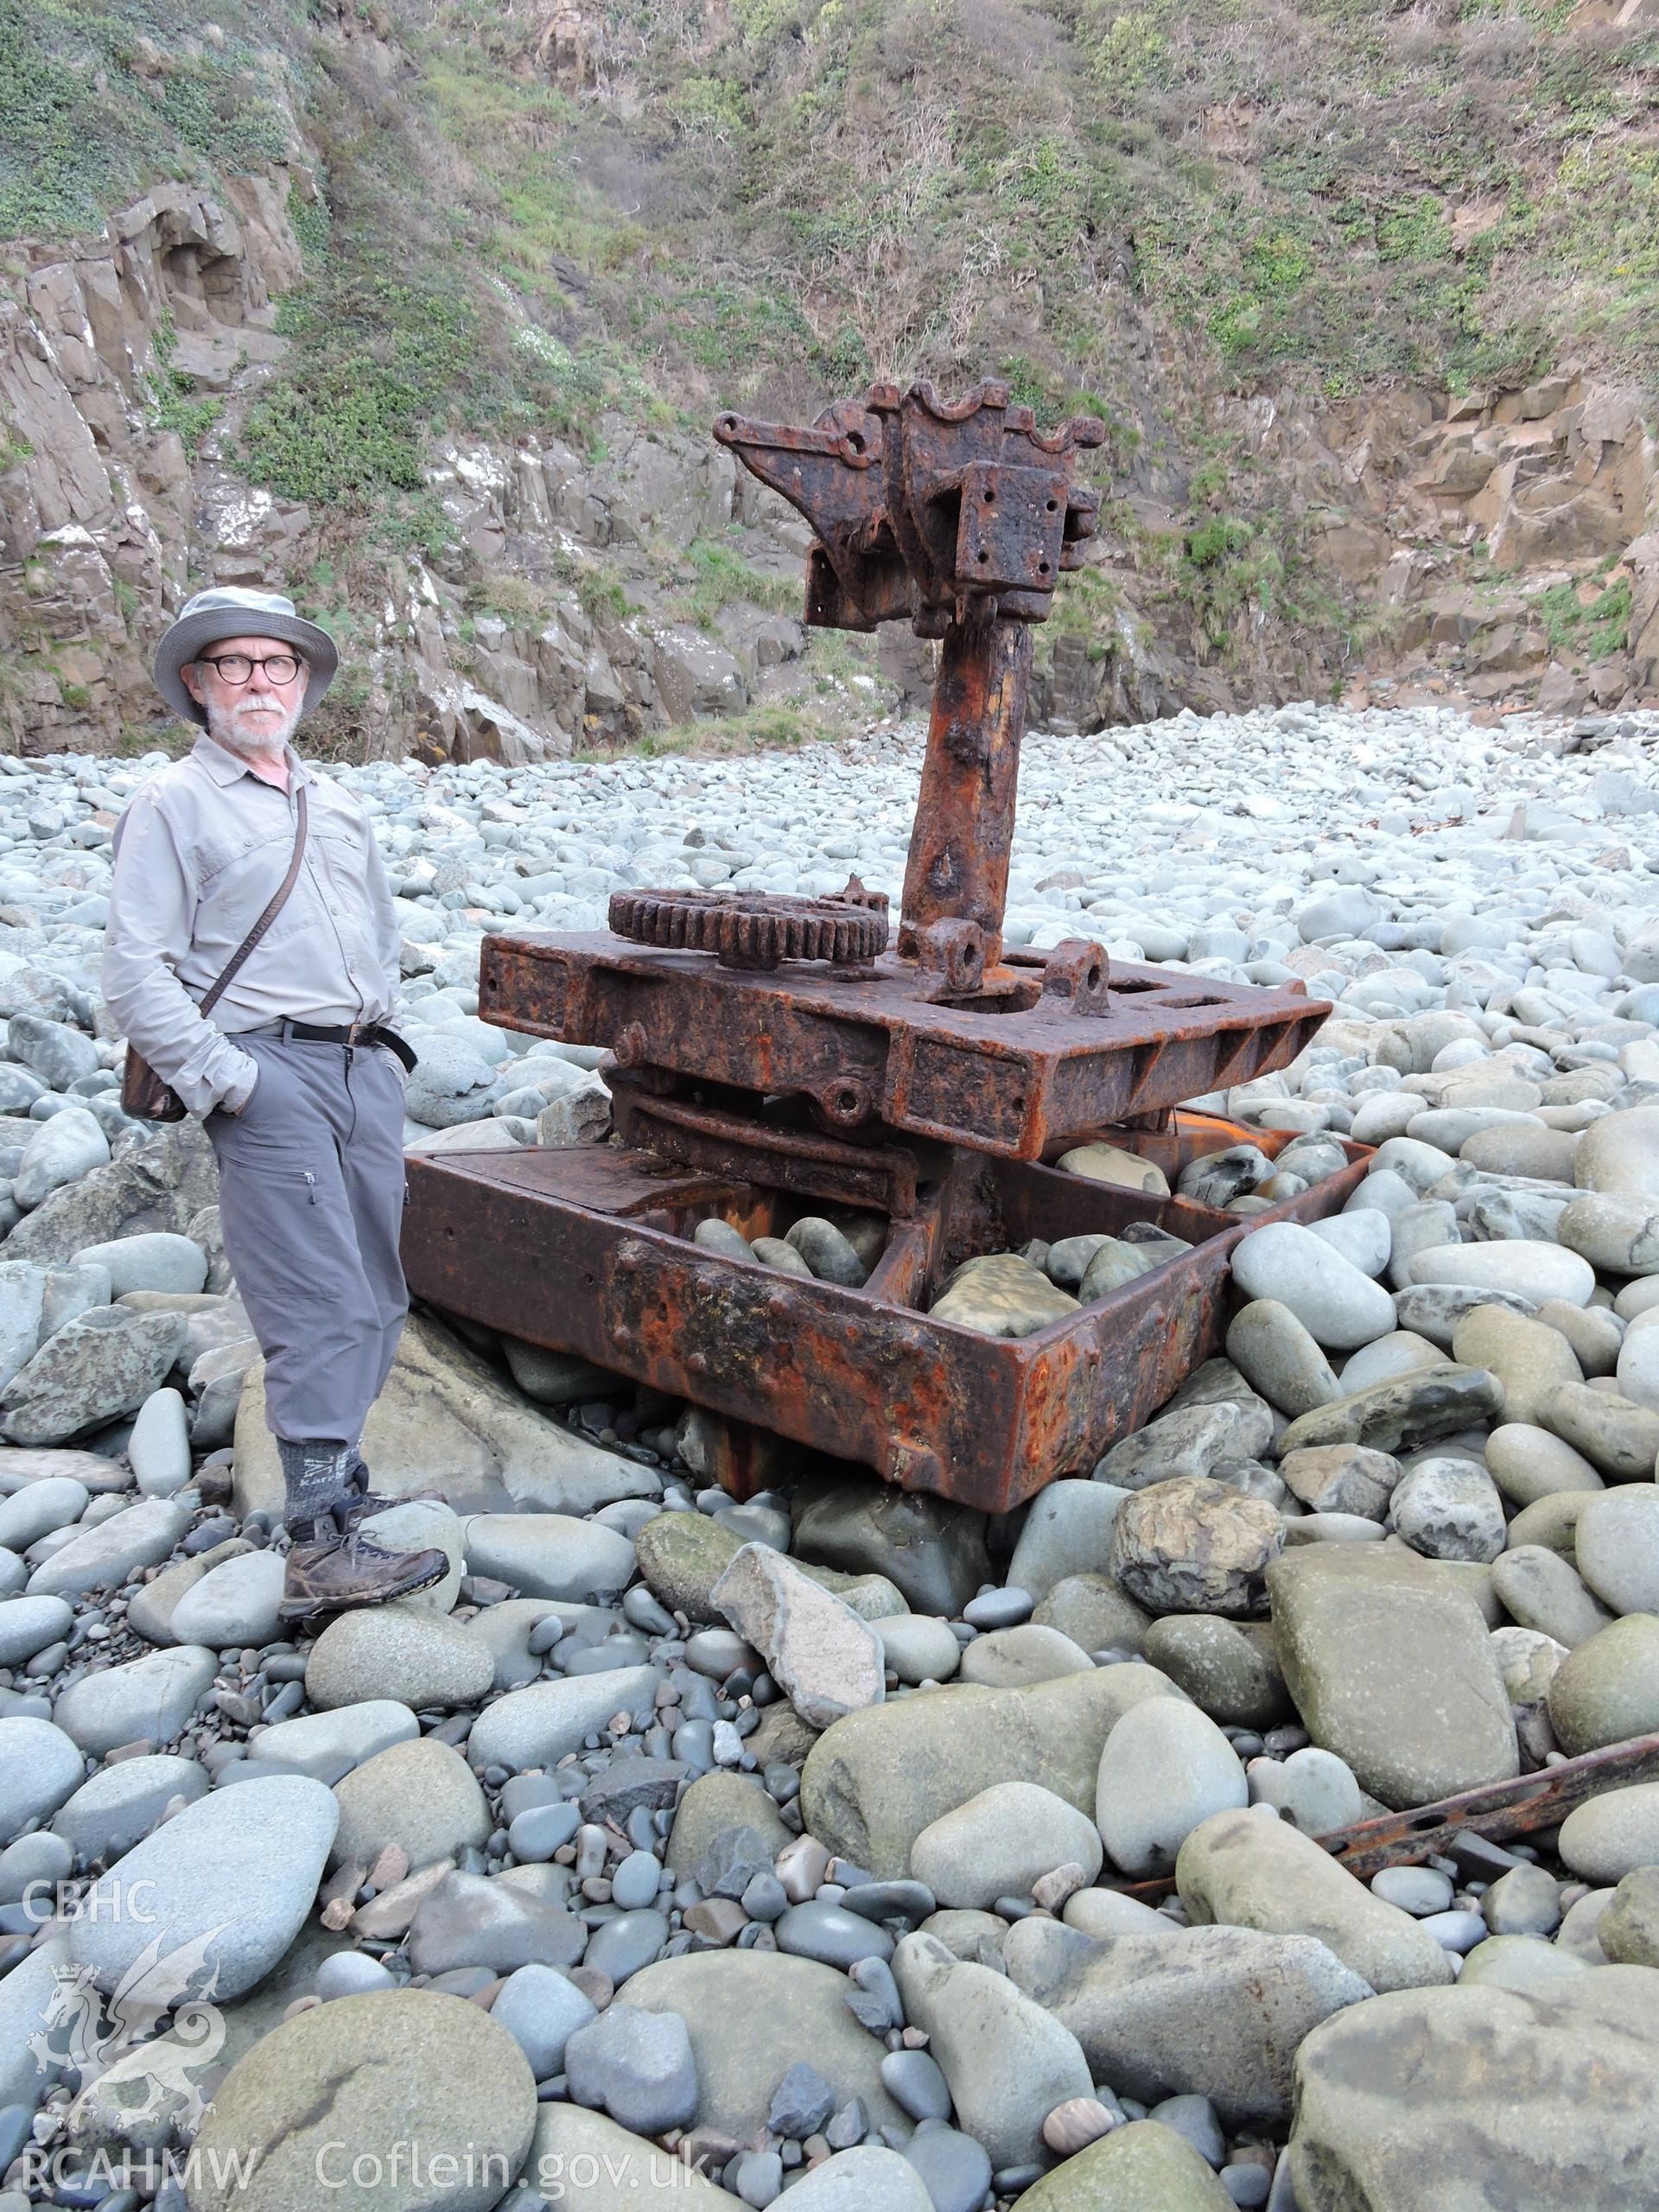 Colour photograph showing old piece of machinery at the quay, with human for scale. Part of a digital photographic survey of Porth y Pistyll, Aberdaron, produced in 2020 by Michael Statham.